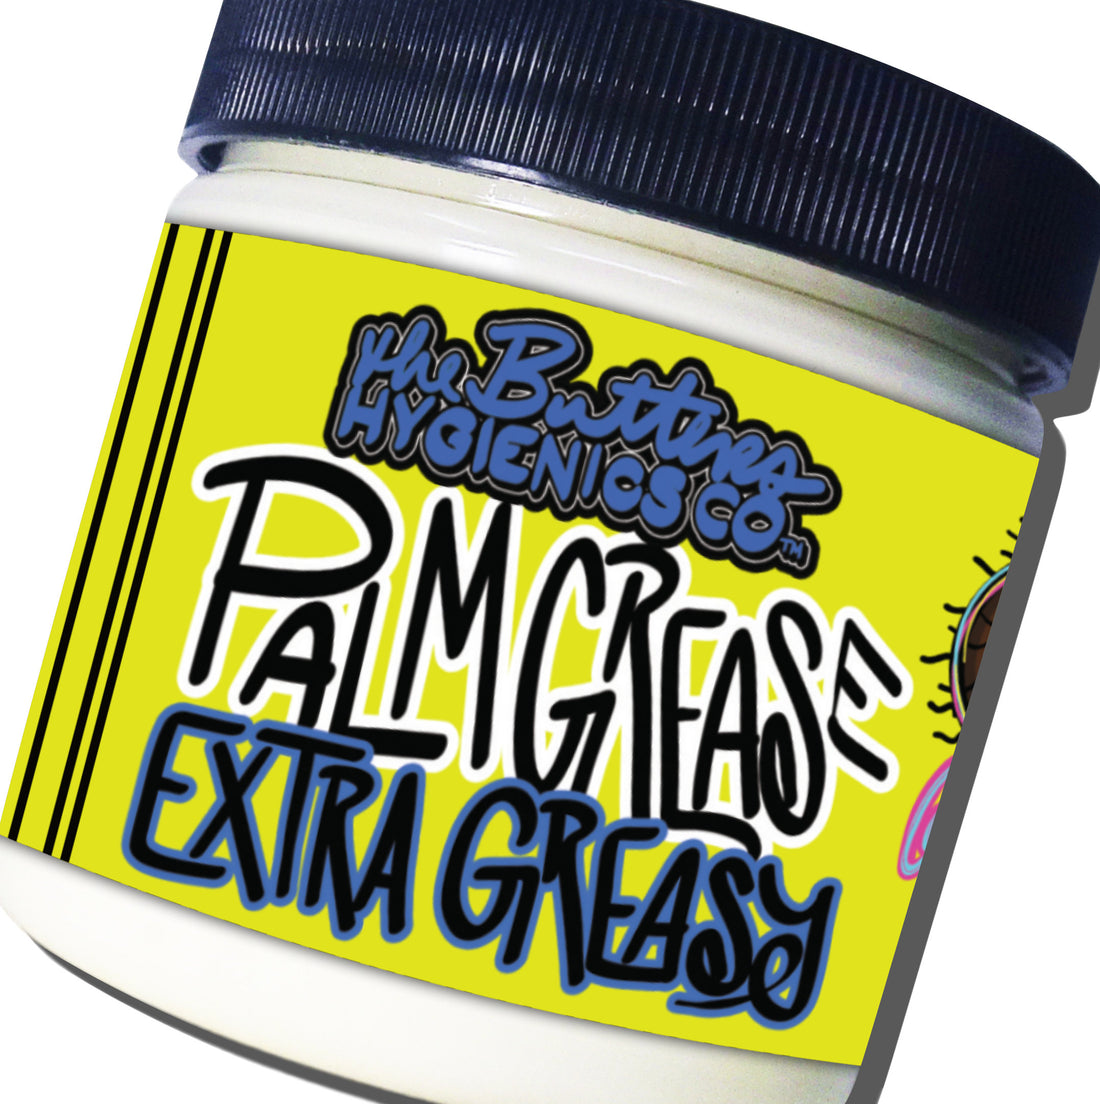 Lube - Palm Grease: Extra Greasy (All Sizes) | Product Media & Descriptions